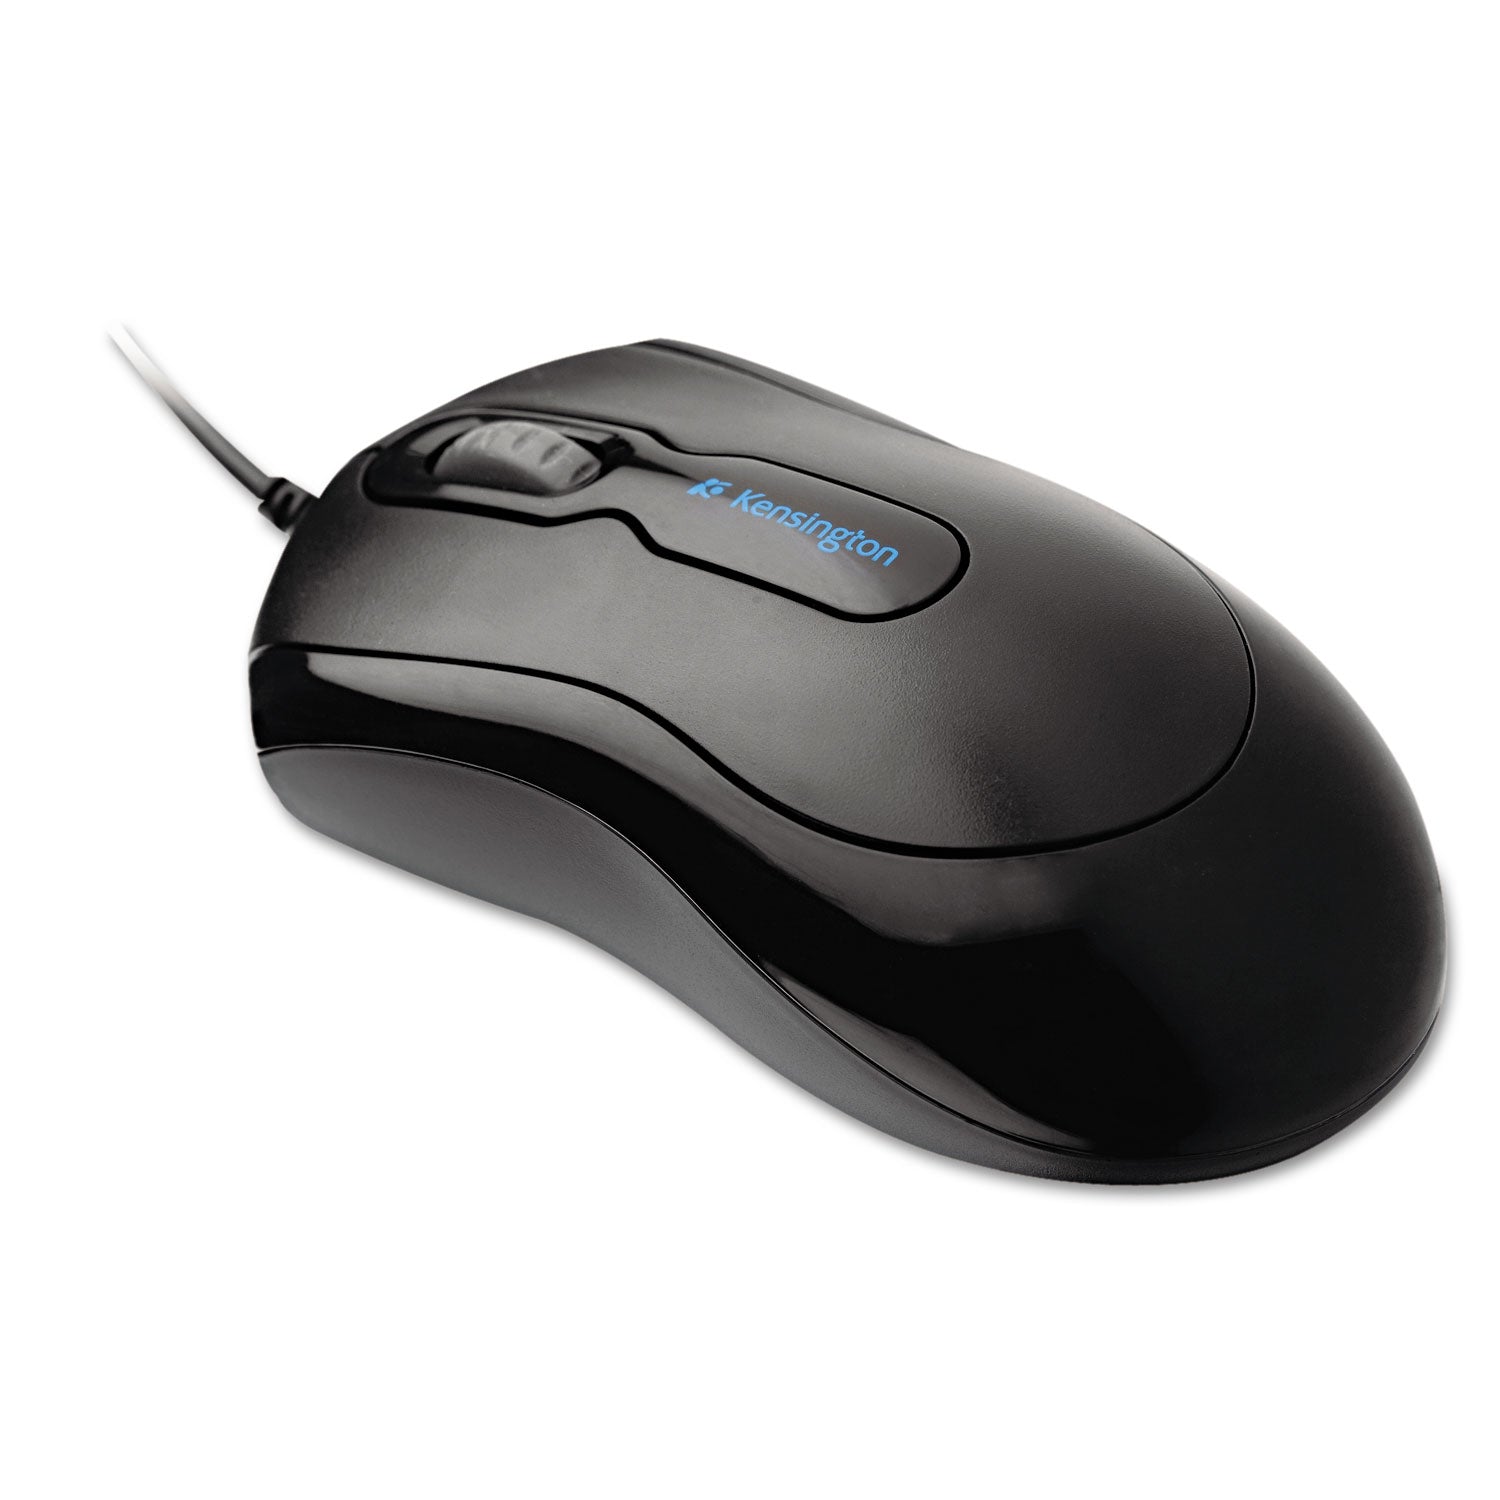 Mouse-In-A-Box Optical Mouse, USB 2.0, Left/Right Hand Use, Black - 